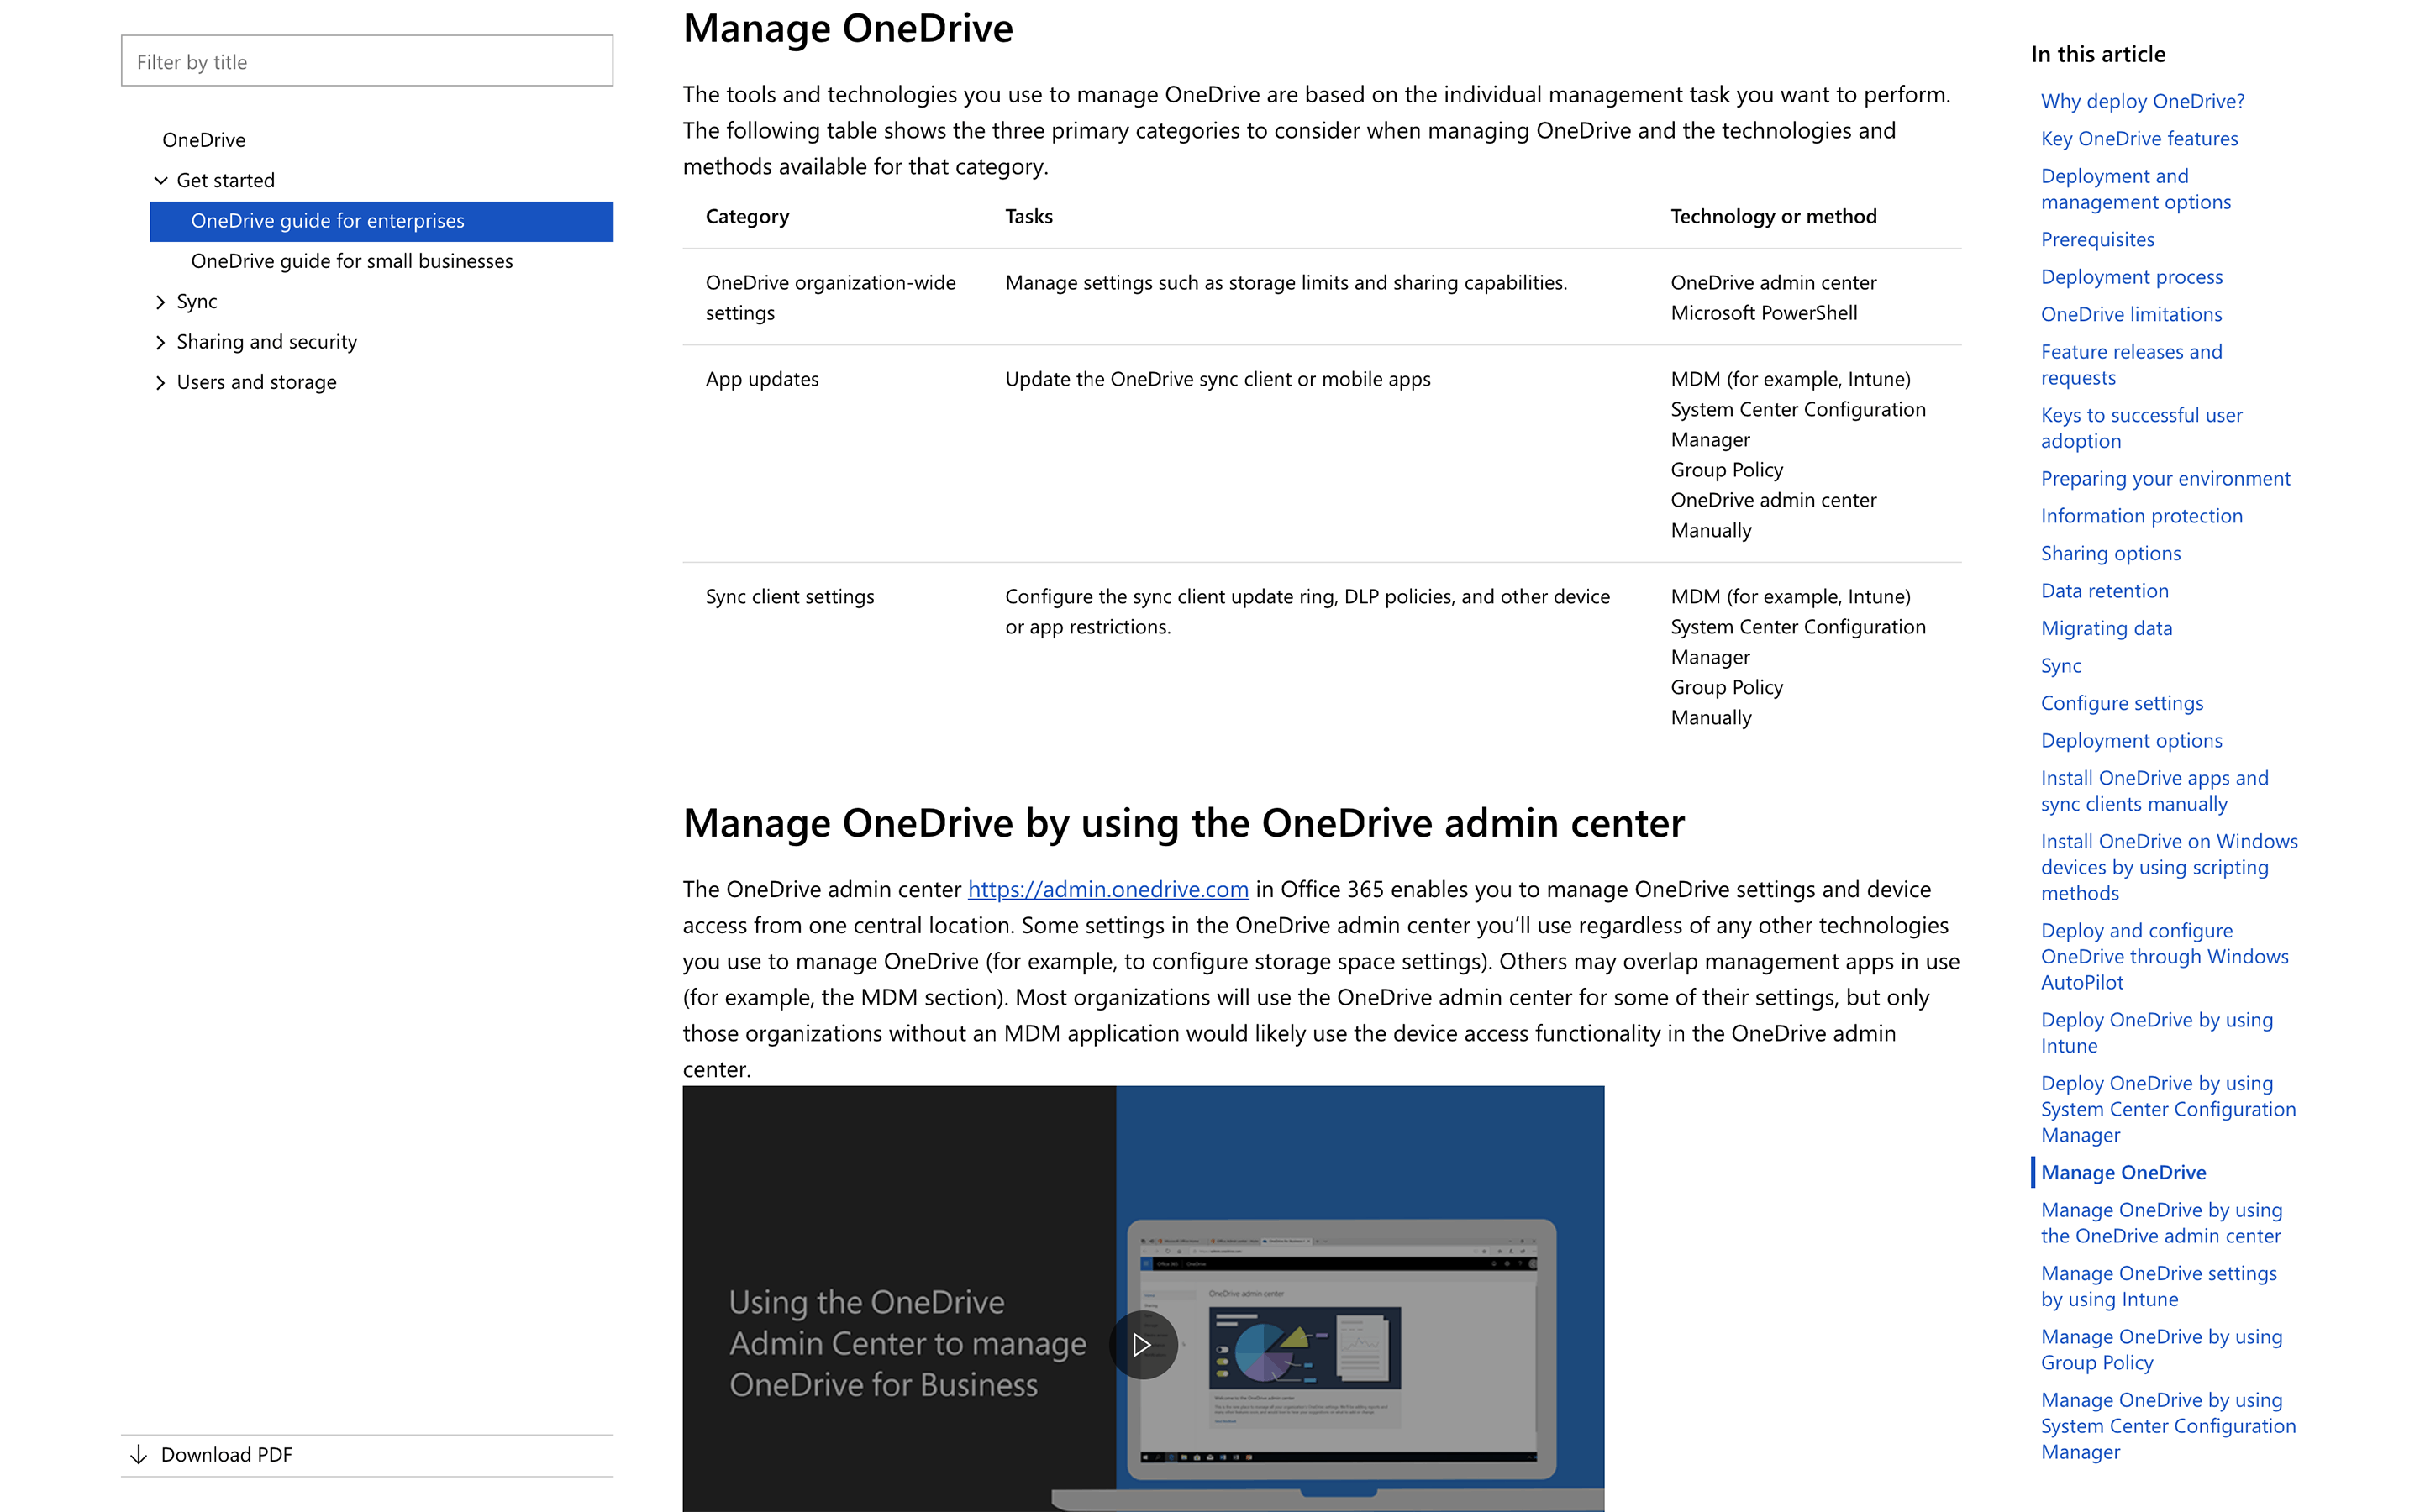 Screenshot of the “Manage OneDrive” section